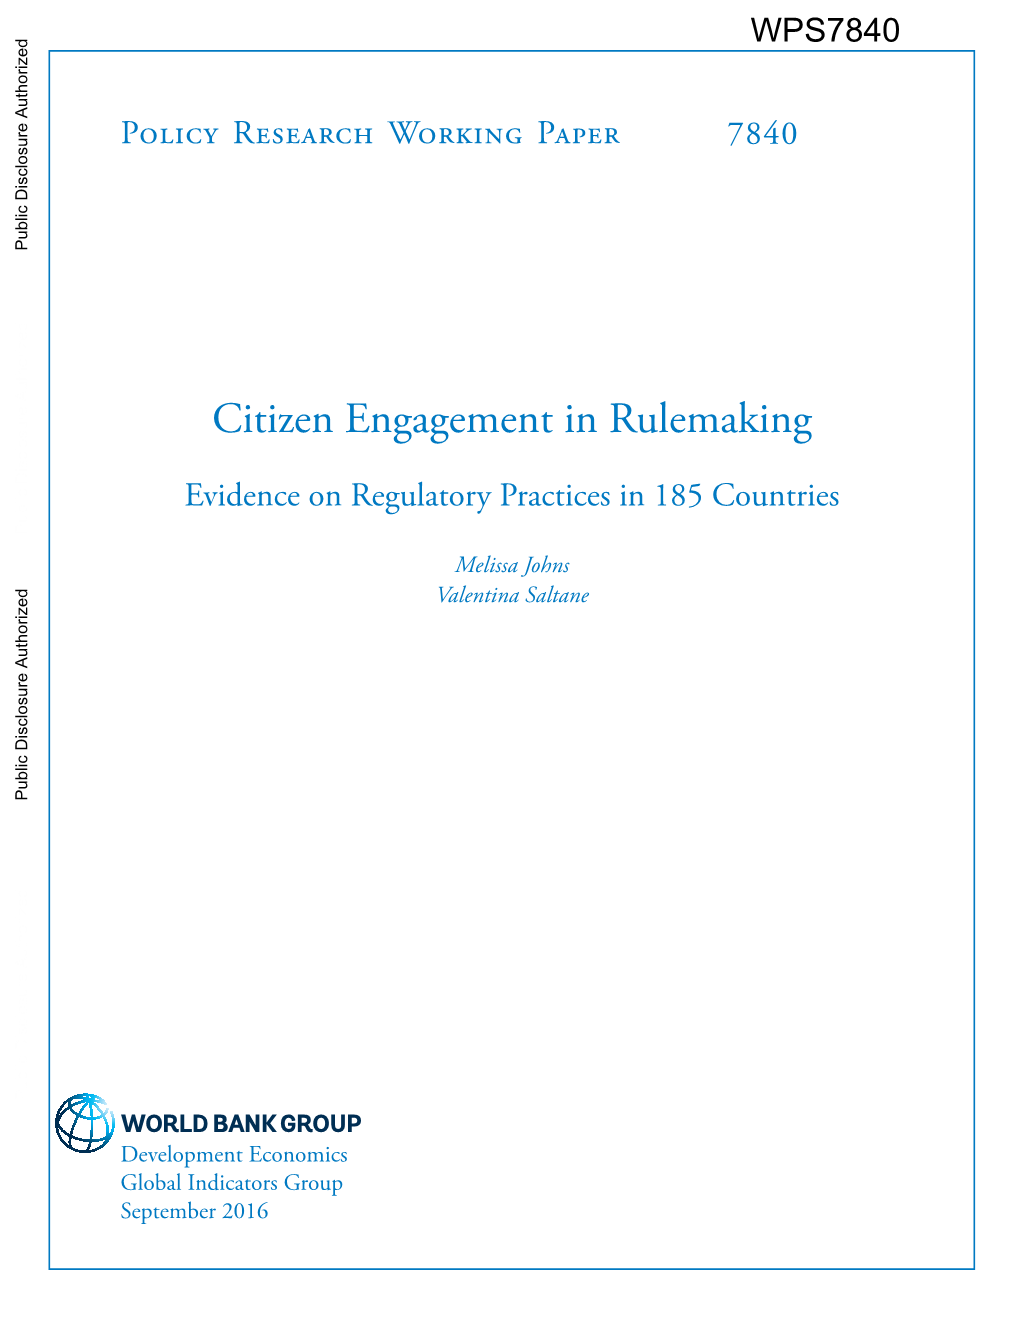 Citizen Engagement in Rulemaking